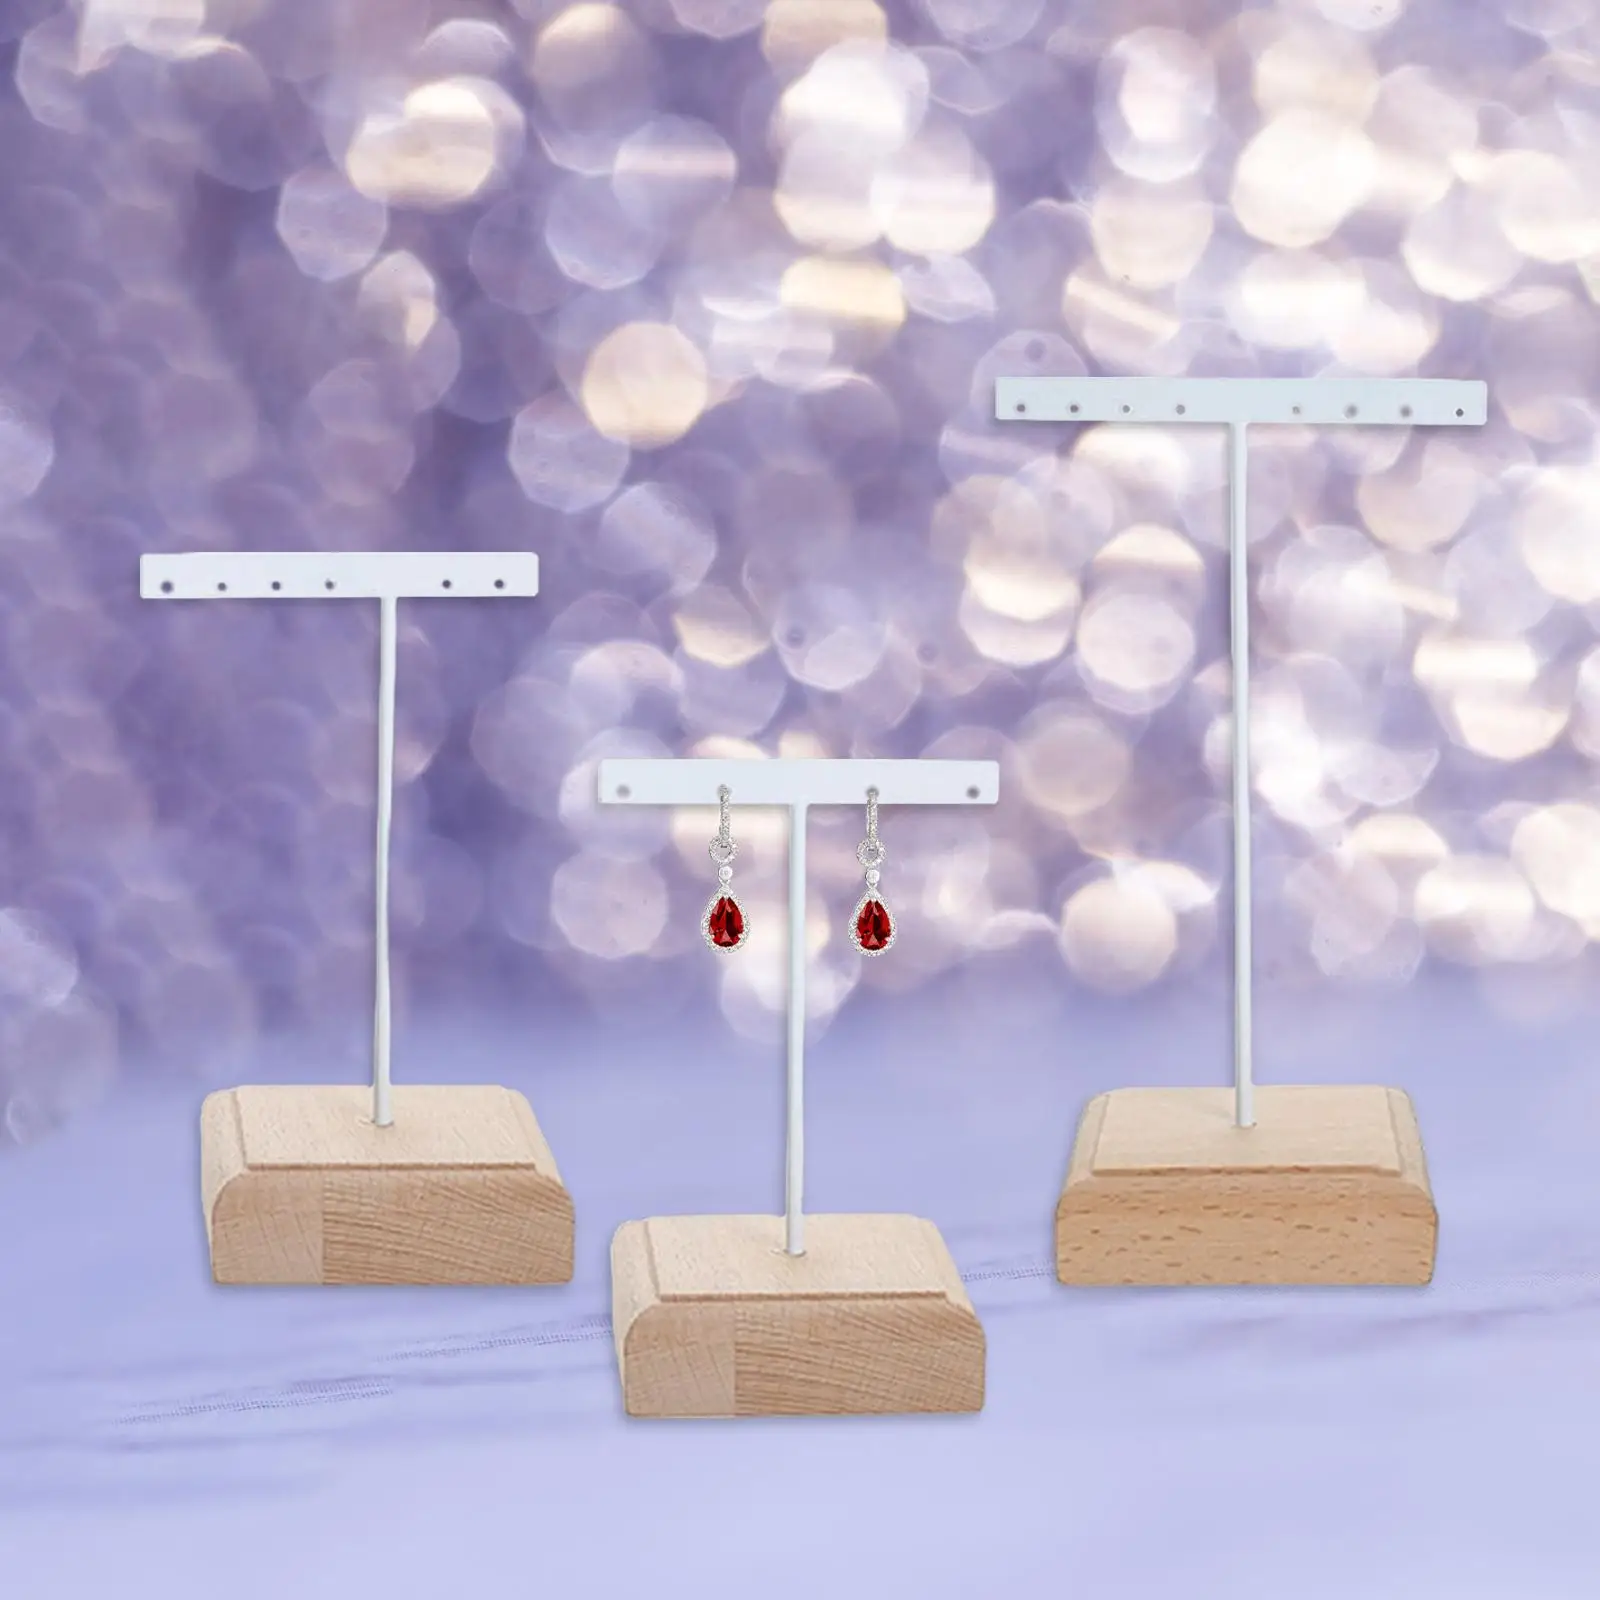 Wooden Base Earrings Holder Stand for Necklaces and Rings - Tabletop Display Rack